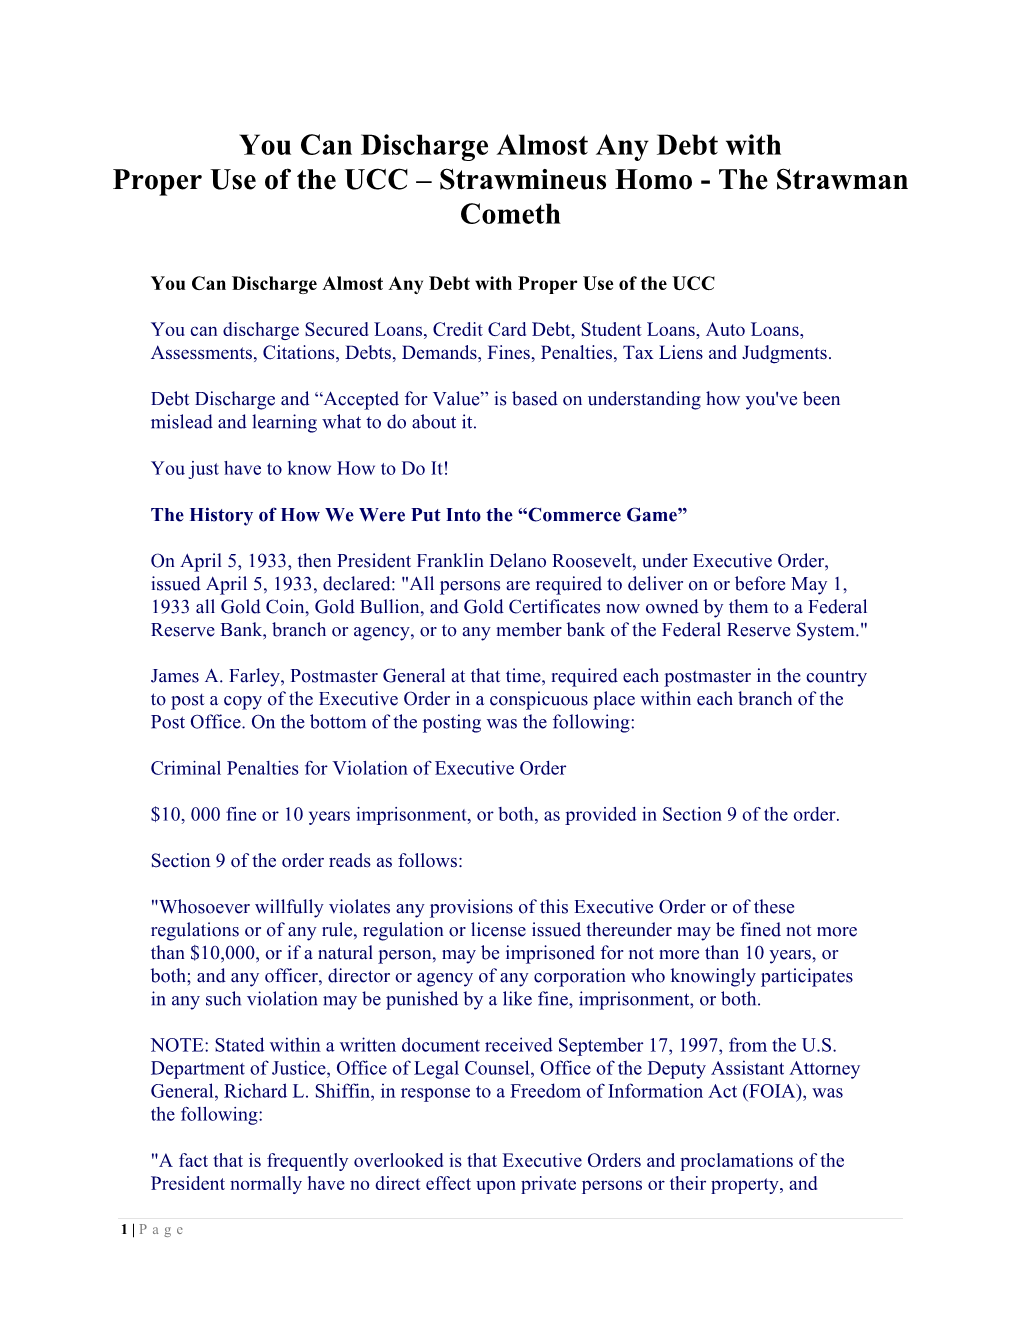 You Can Discharge Almost Any Debt with Proper Use of the UCC – Strawmineus Homo - the Strawman Cometh